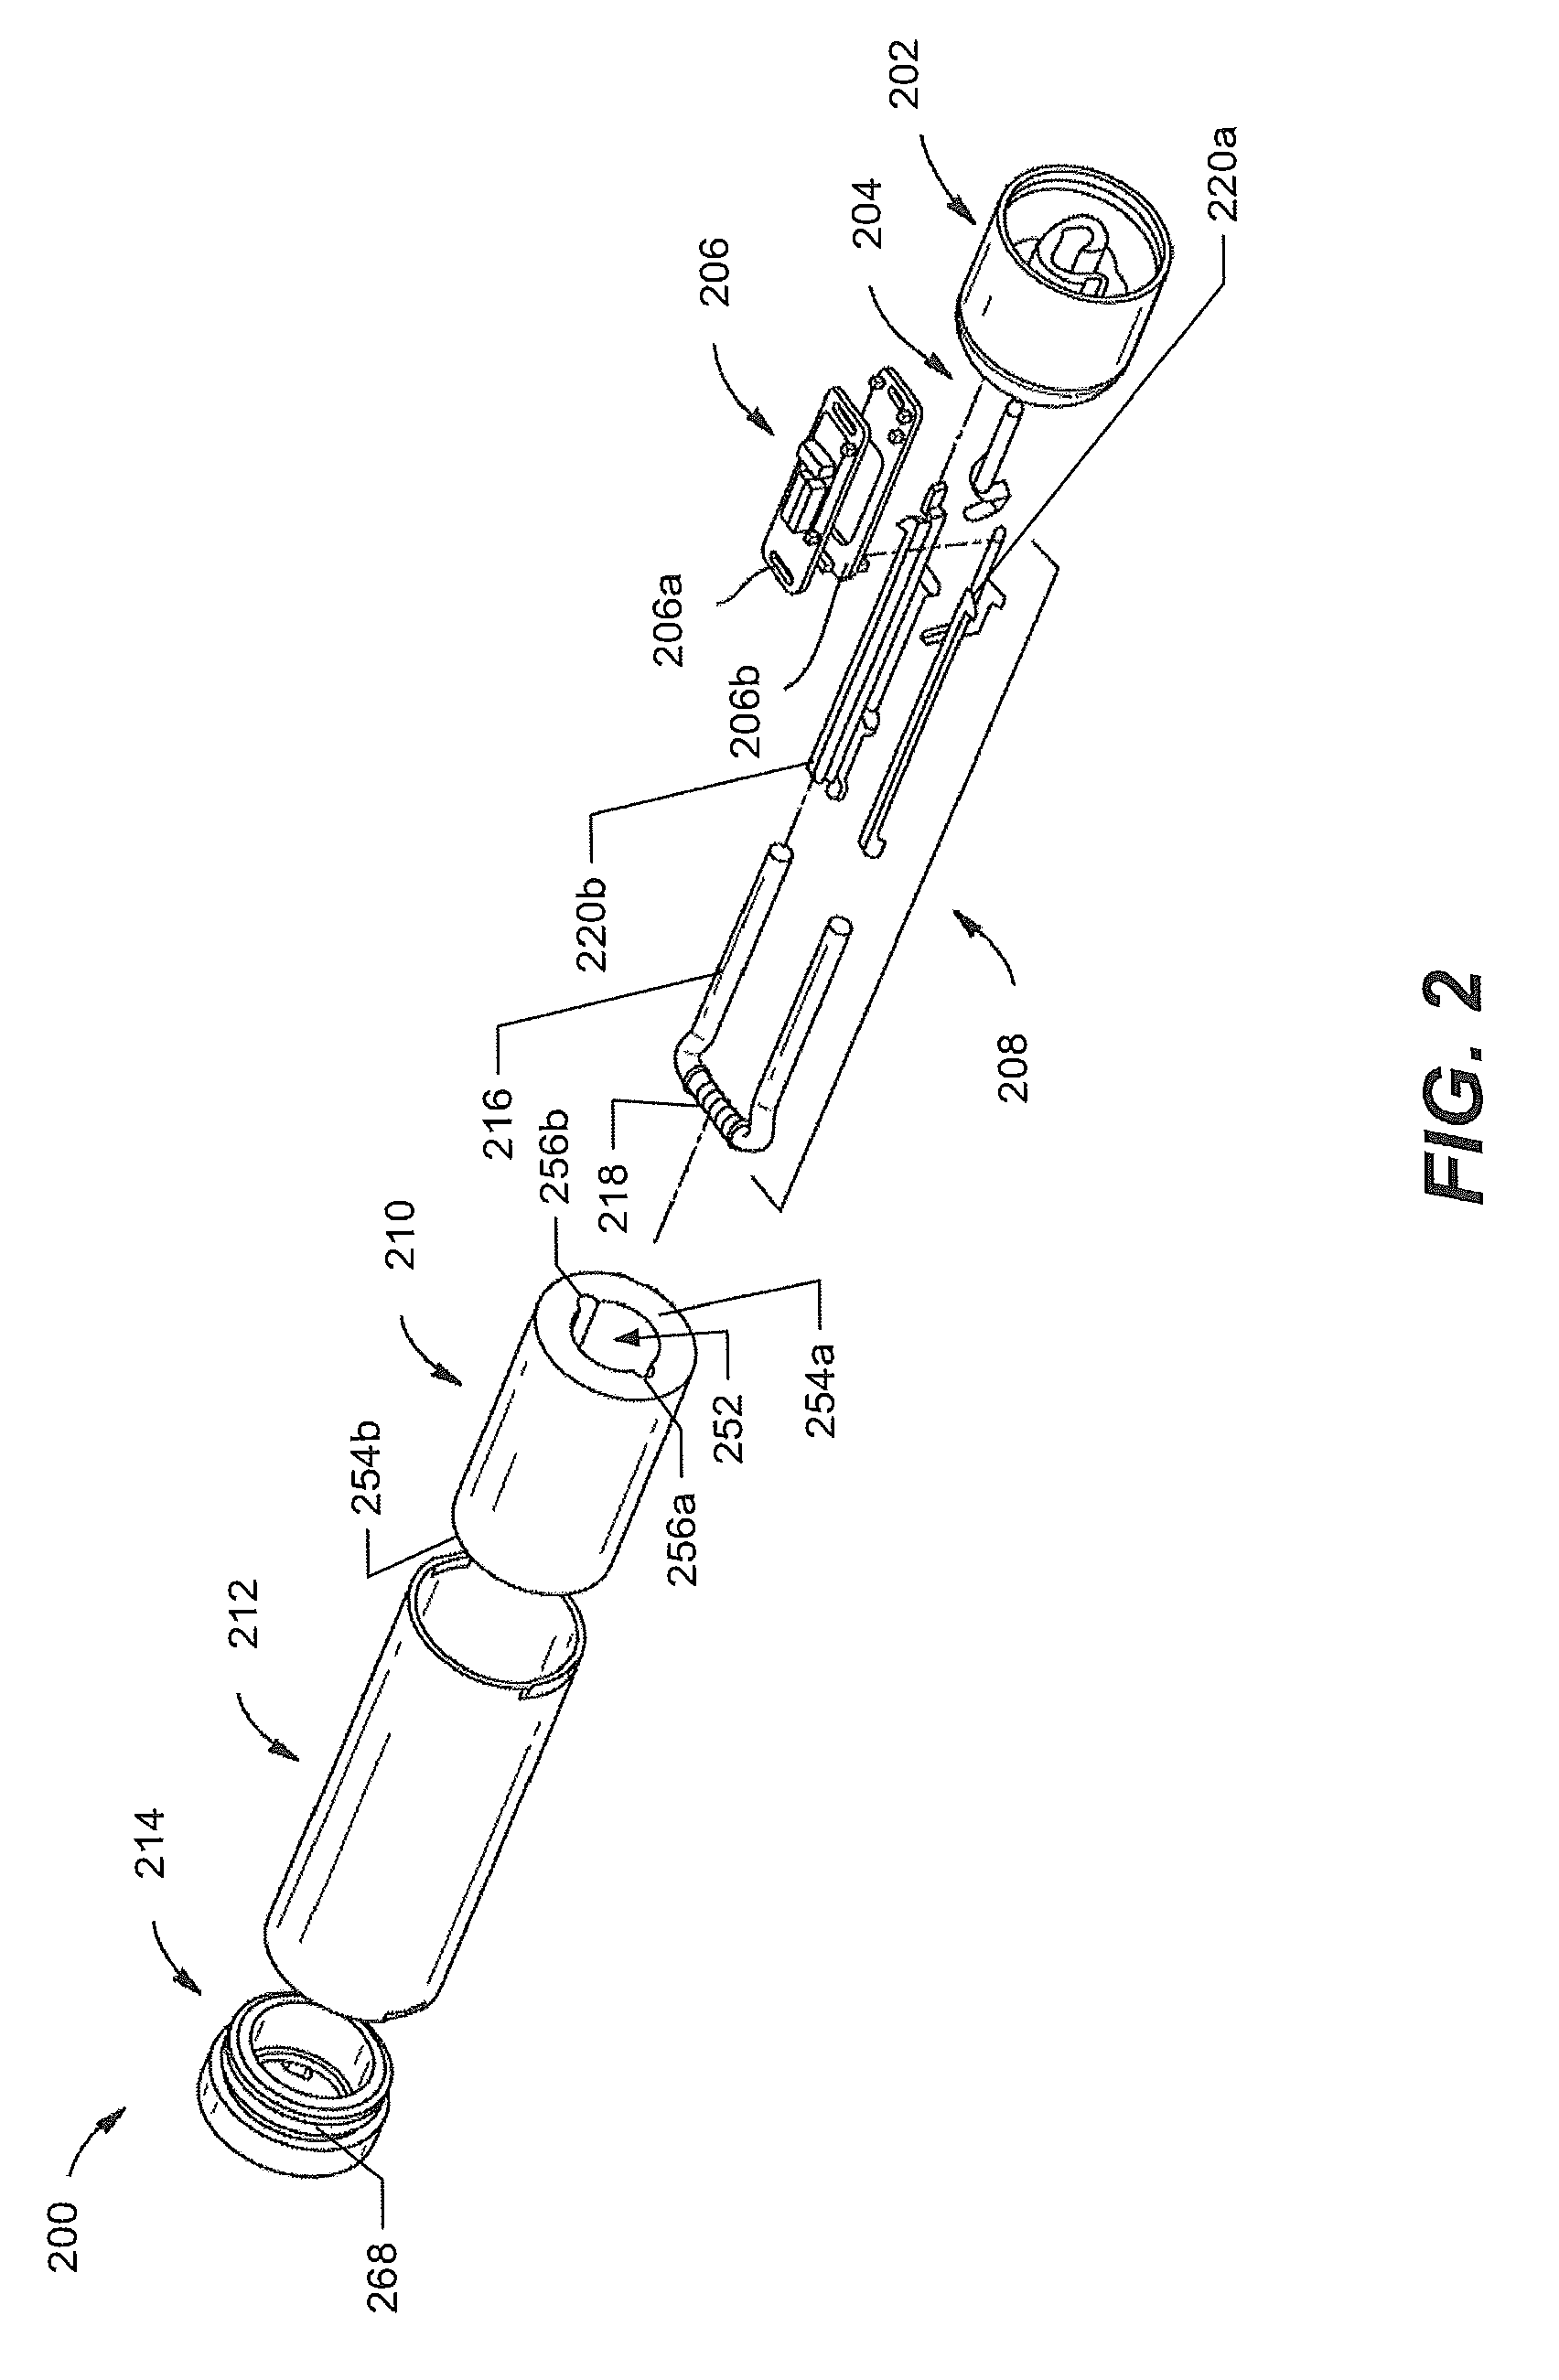 Atomizer for an aerosol delivery device and related input, aerosol production assembly, cartridge, and method